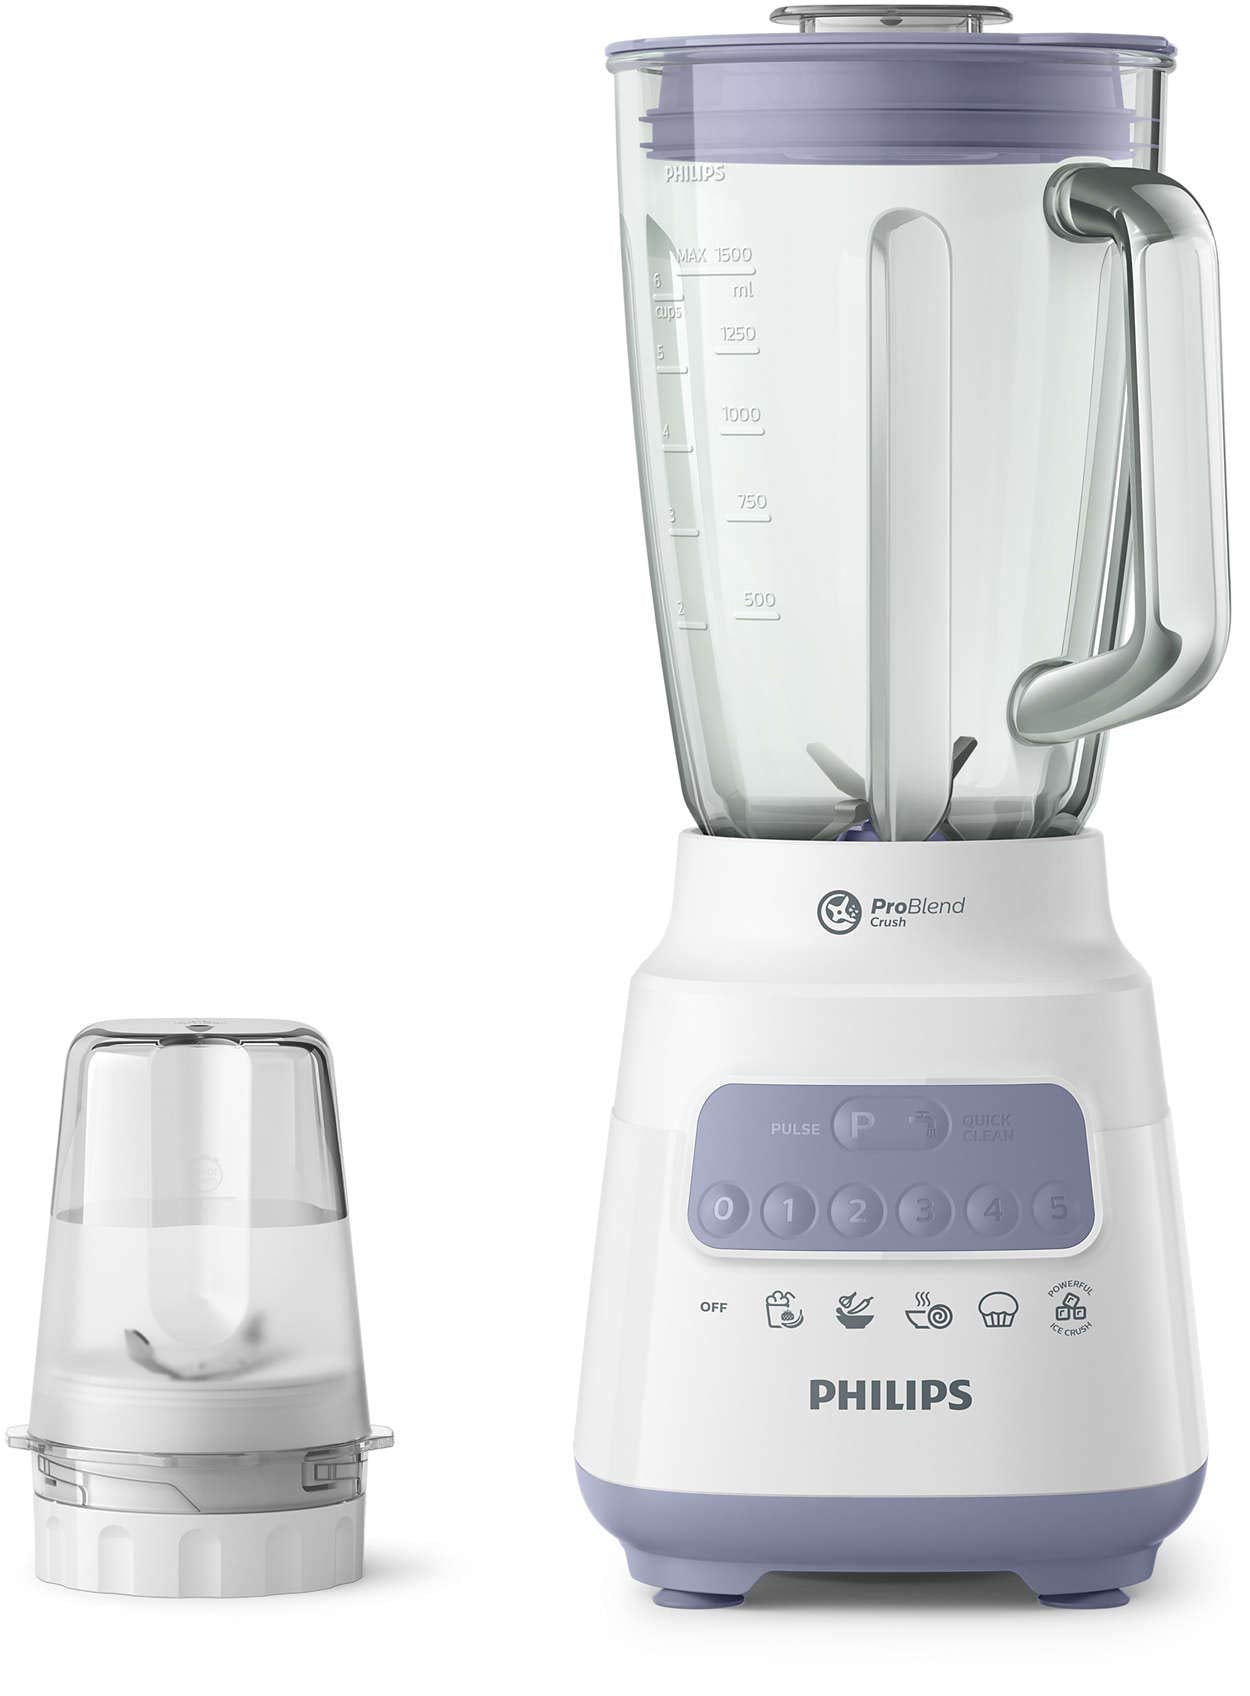 Philips Multichopper Review and Demo 